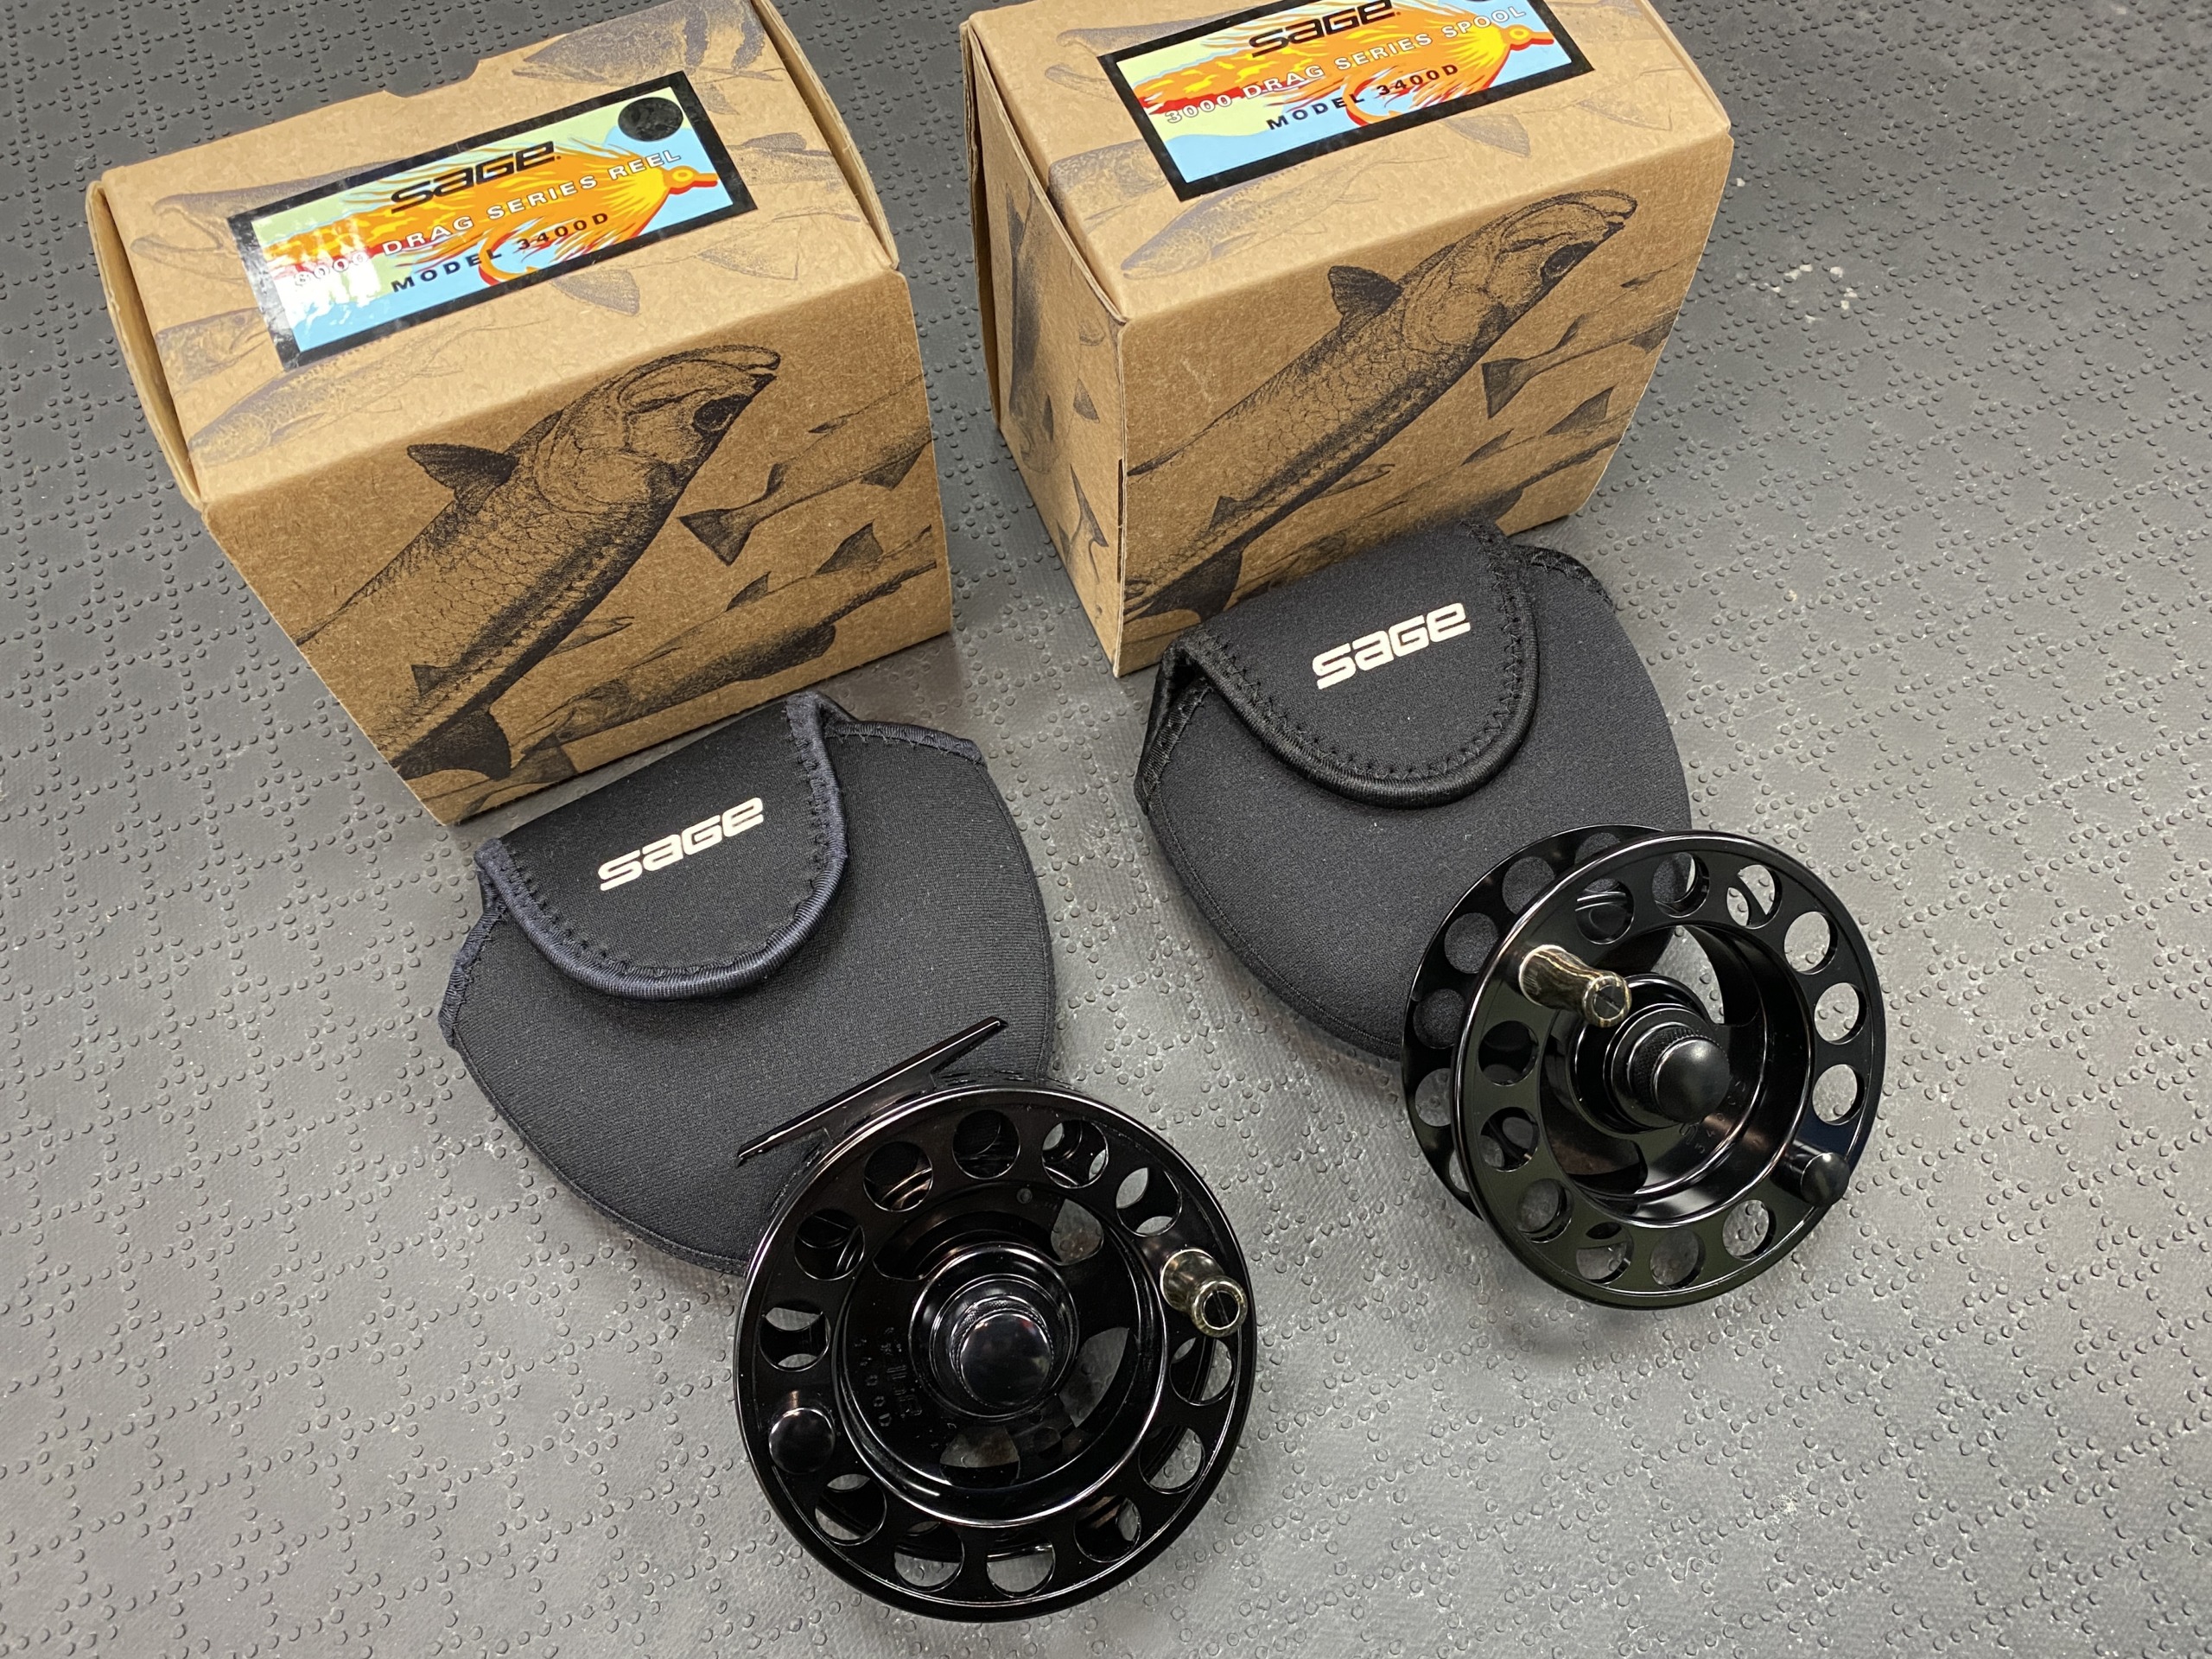 Sage 3400D Switch or Saltwater Fly Reel & Spare Spool - LIKE NEW! - $400